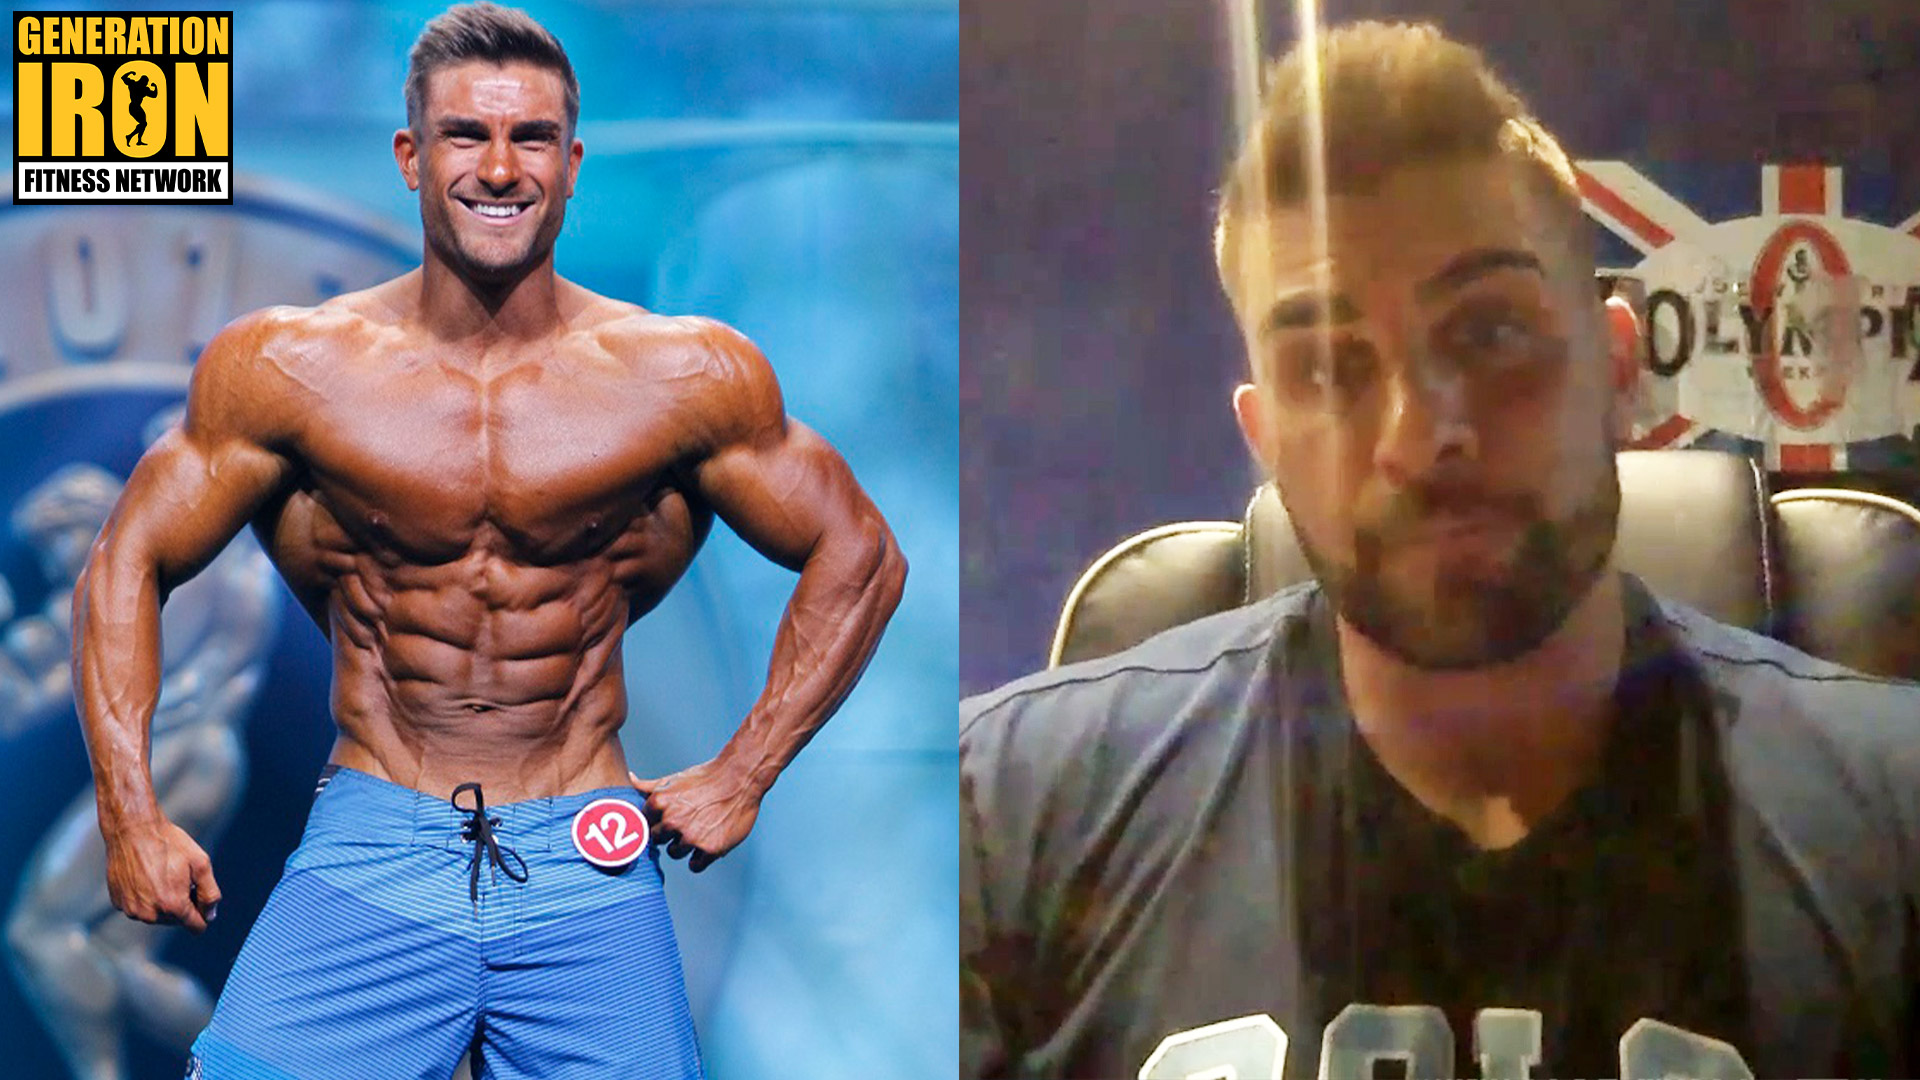 Ryan Terry: There Should Be A Weight Limit On The Men’s Physique Division